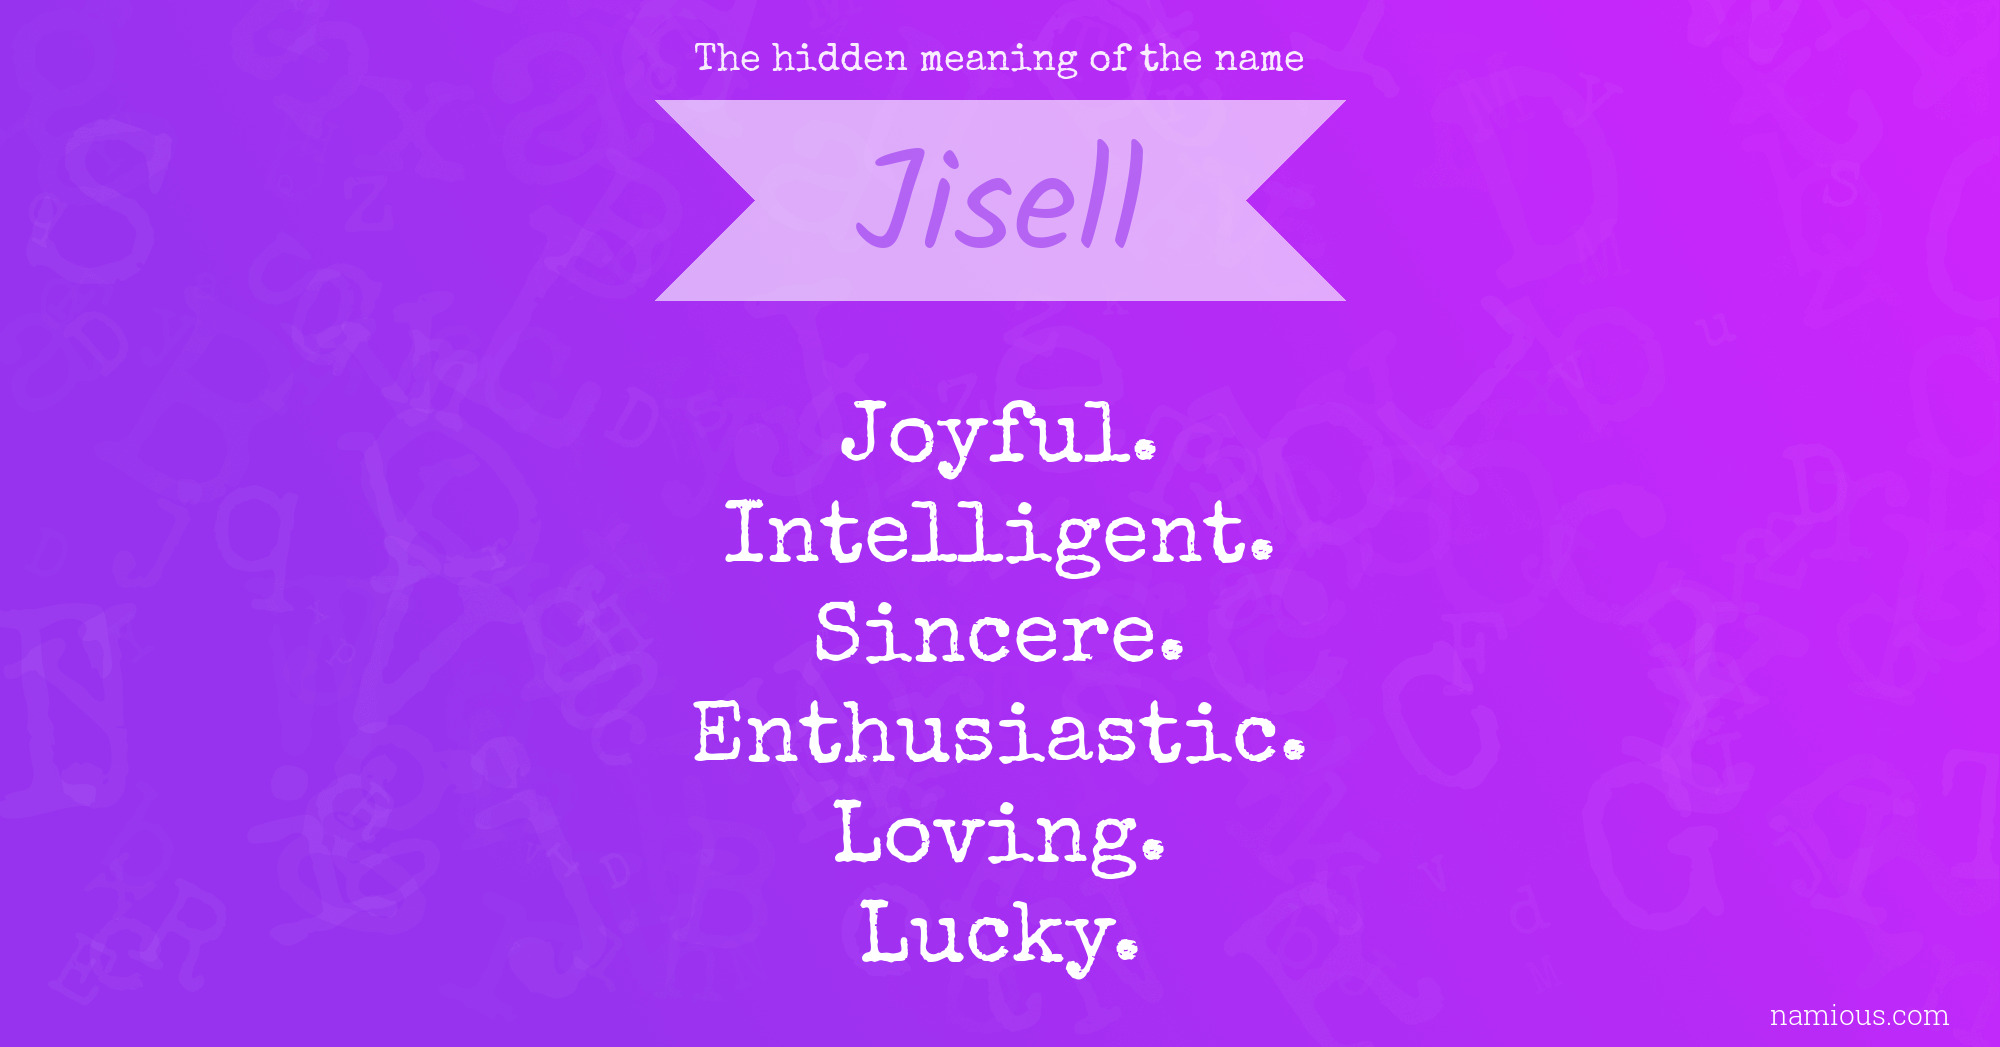 The hidden meaning of the name Jisell